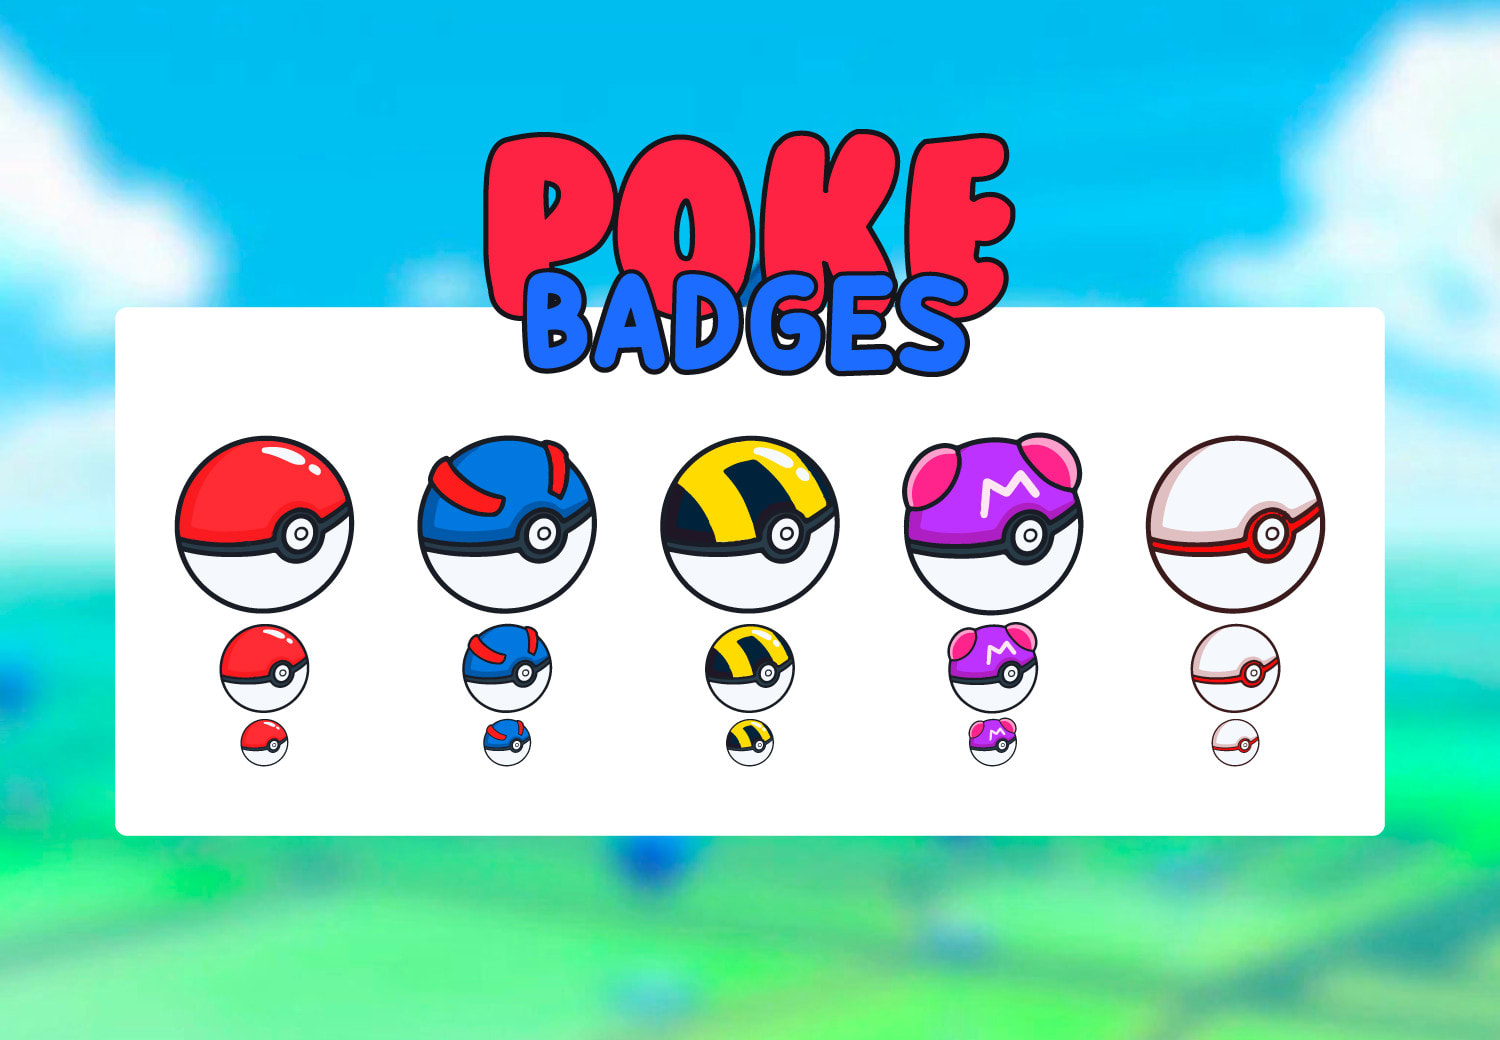 Send You 5 Predesign Pokeball Sub Or Cheer Badges For Twitch By Marcelondon